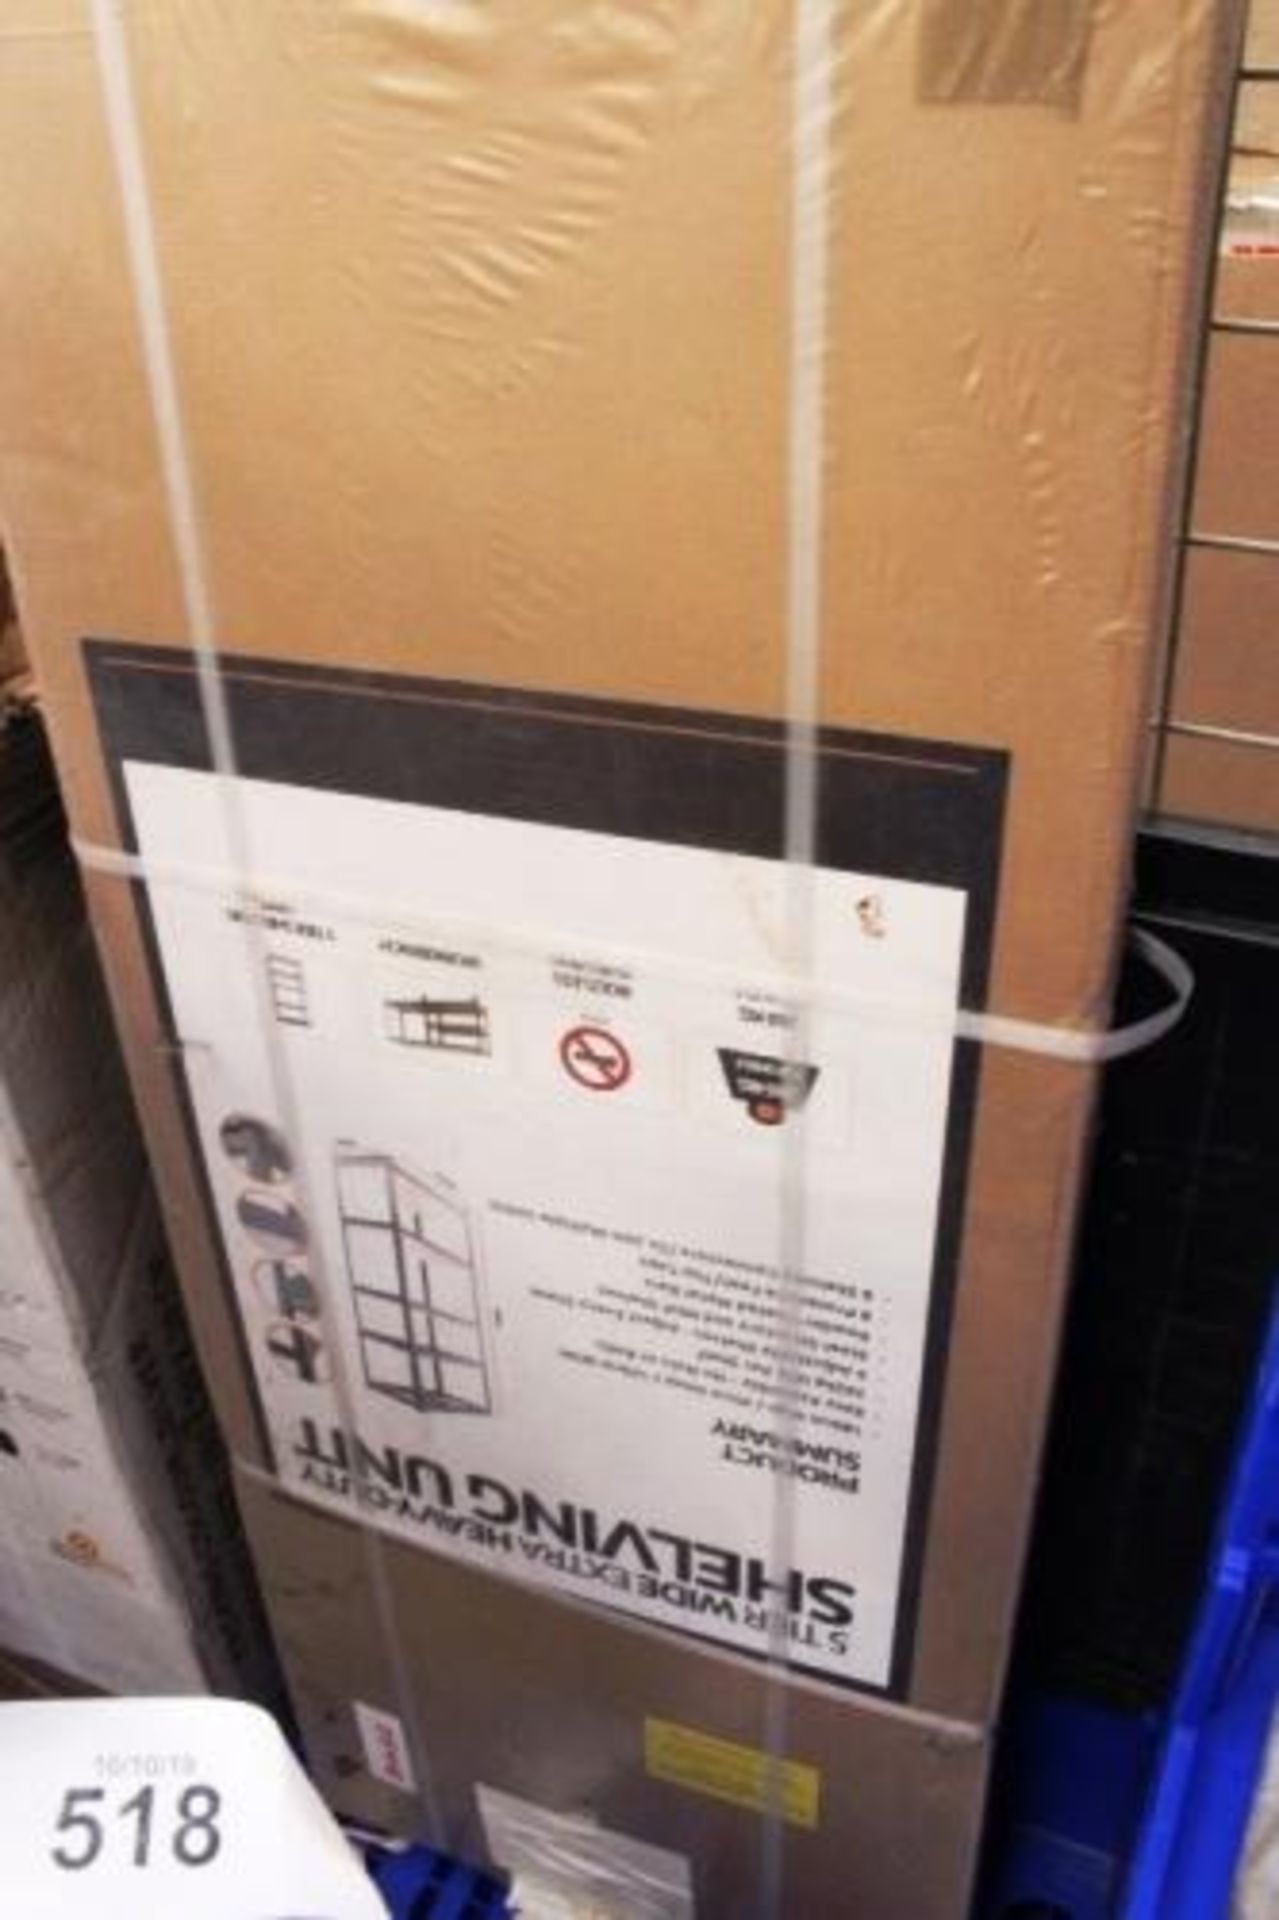 An unbranded 5 tier heavy duty shelving unit - Sealed new in box (GSF54)